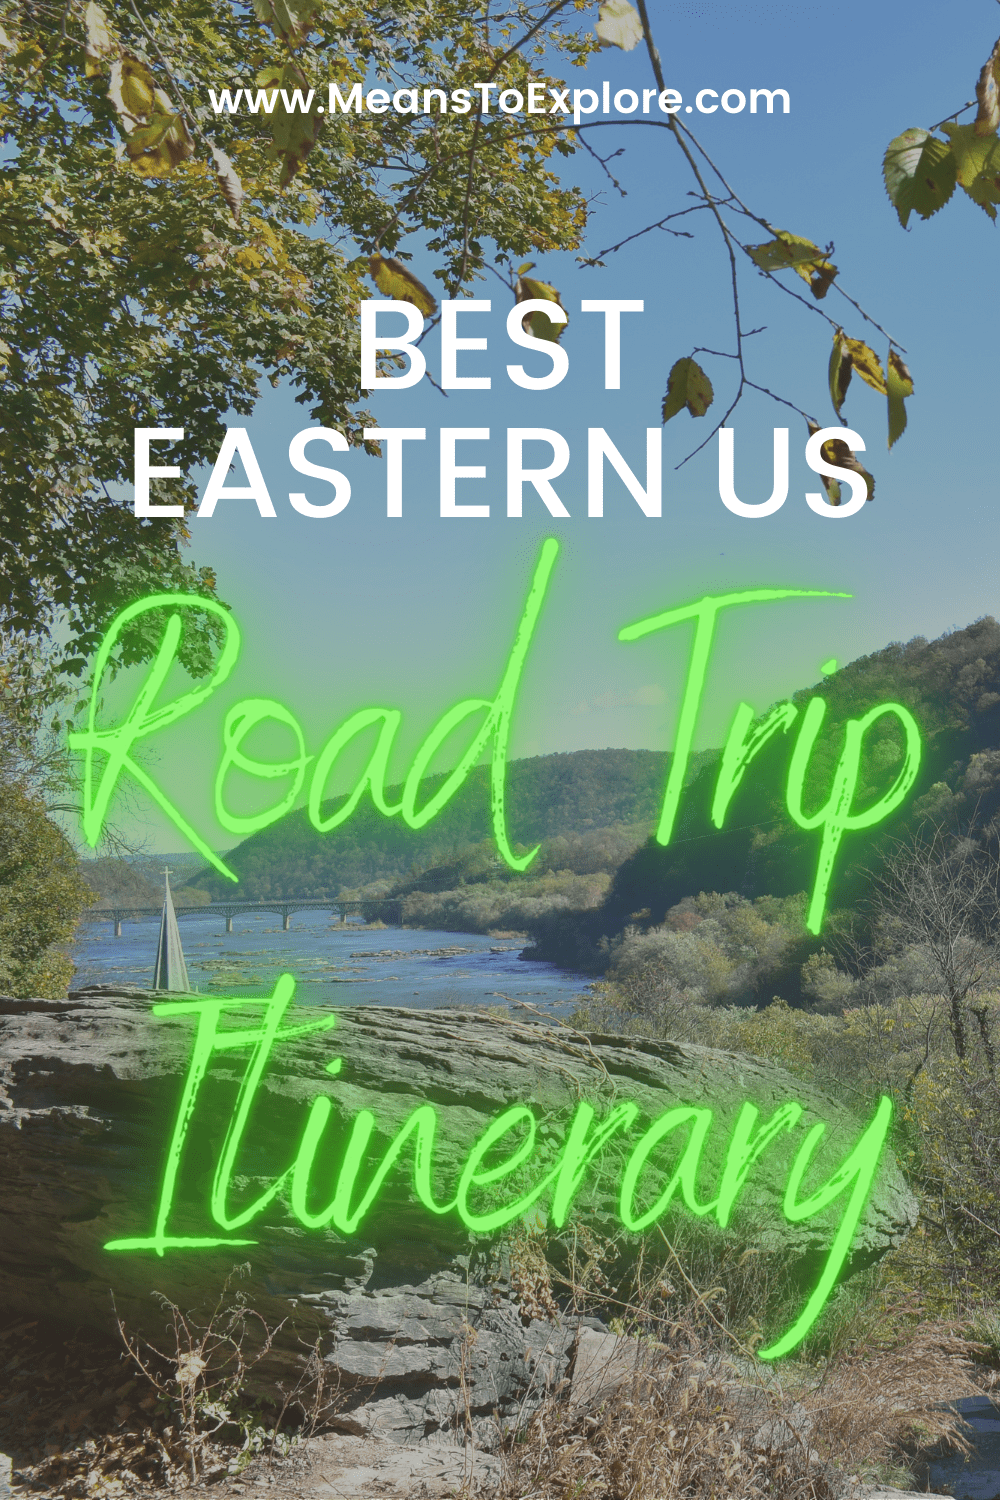 Best Eastern US Road Trip Itinerary for an Unforgettable Week Away!